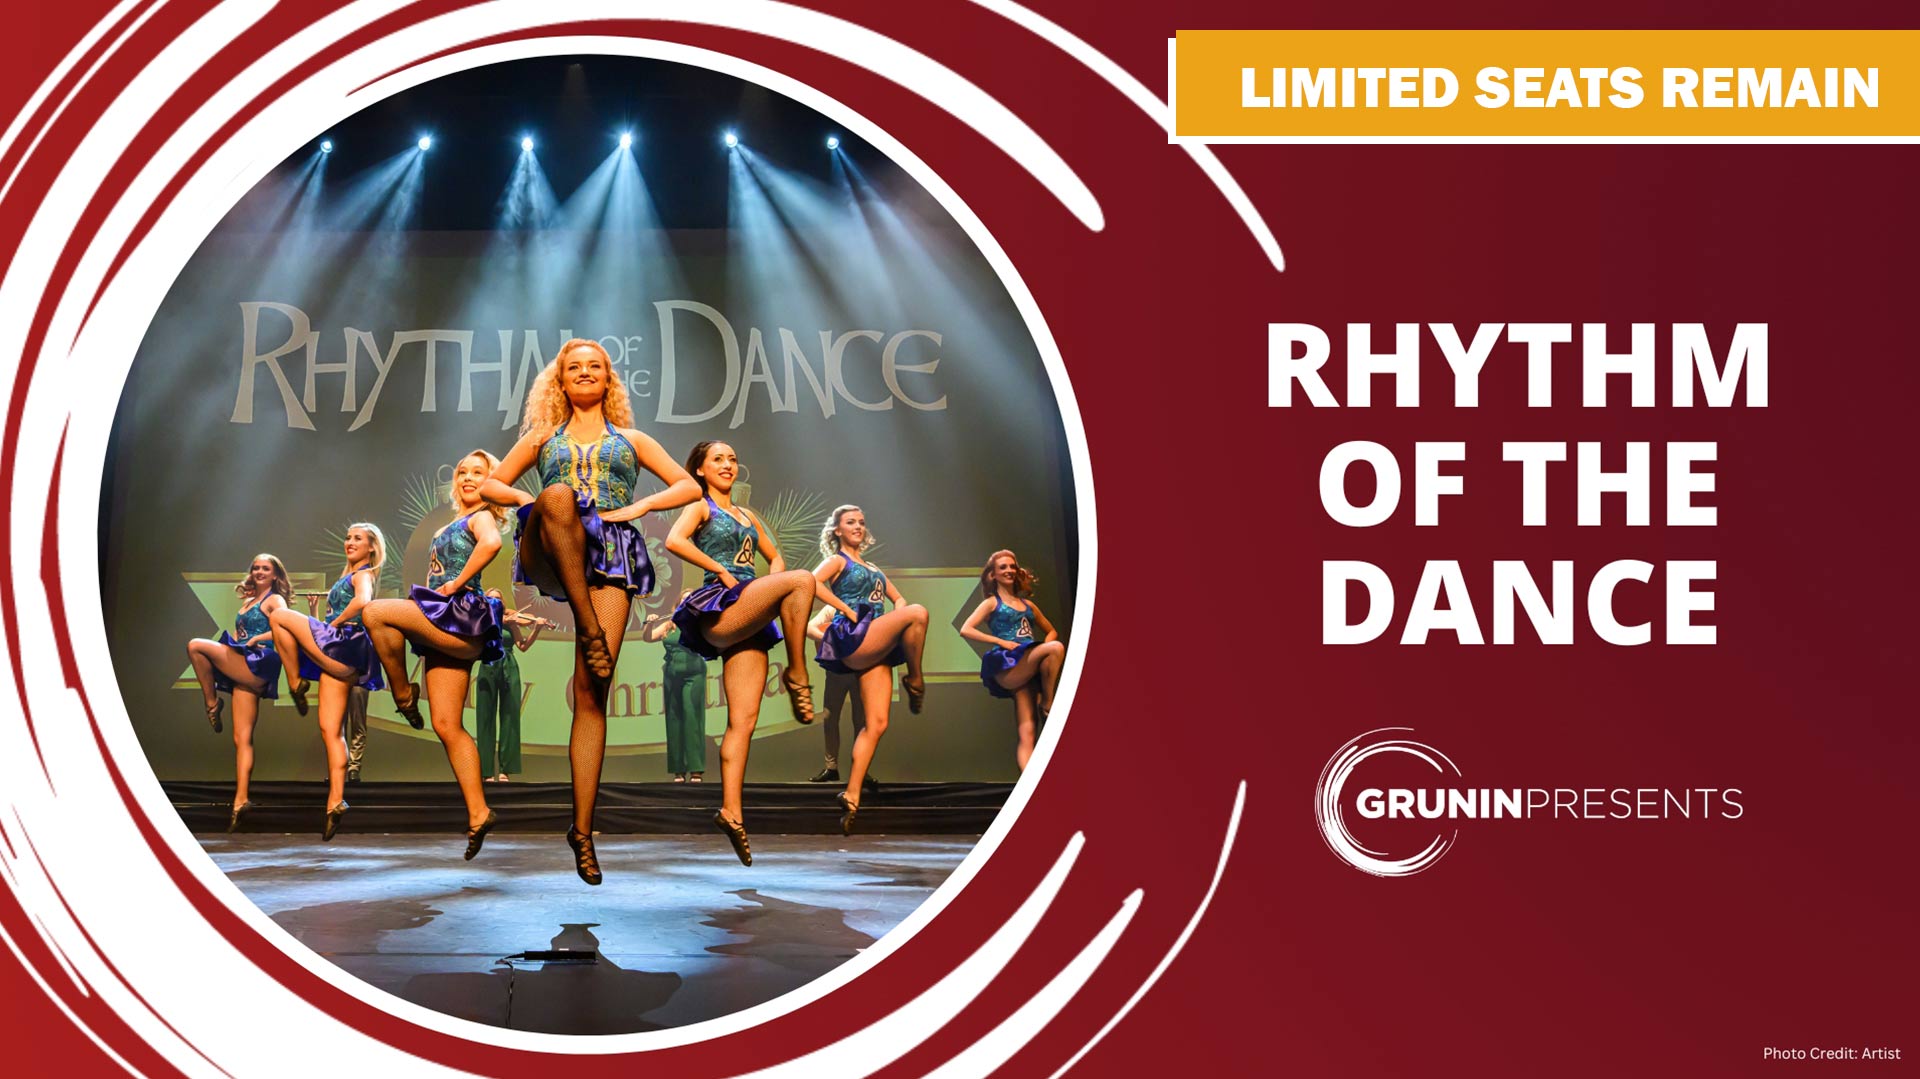 Rhythm of the Dance - Limited Seating Remains